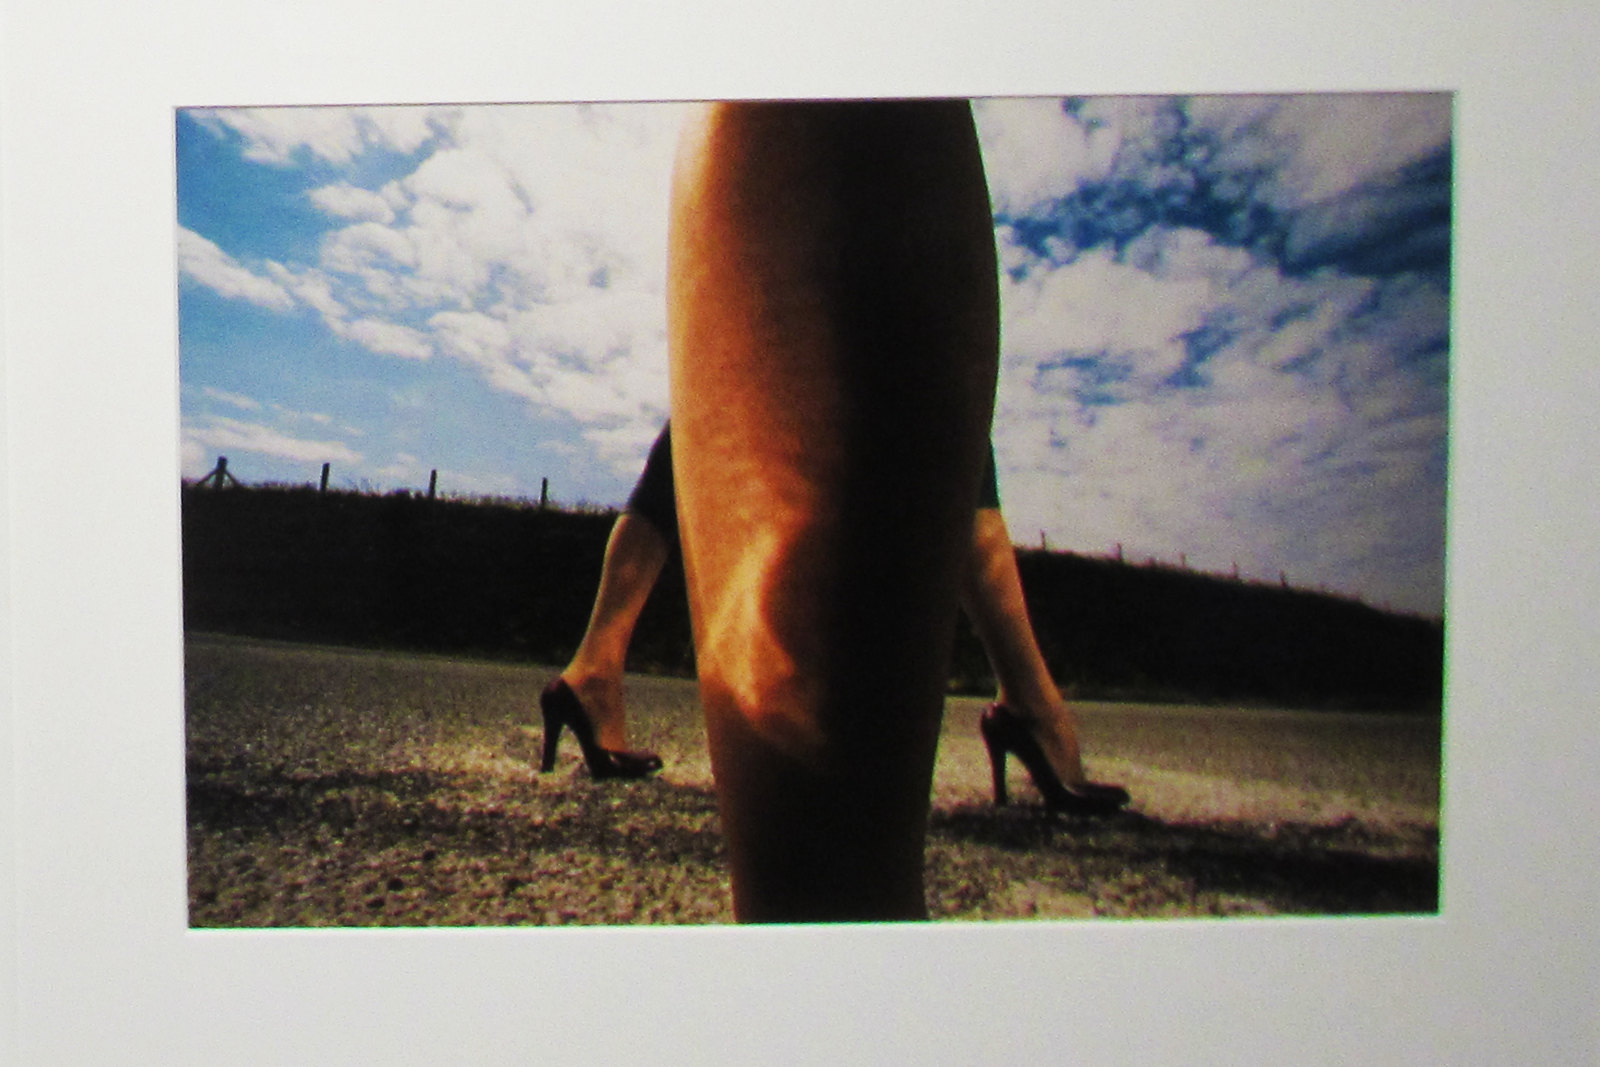 16123630138_be104e0710_h Guy Bourdin at Somerset House